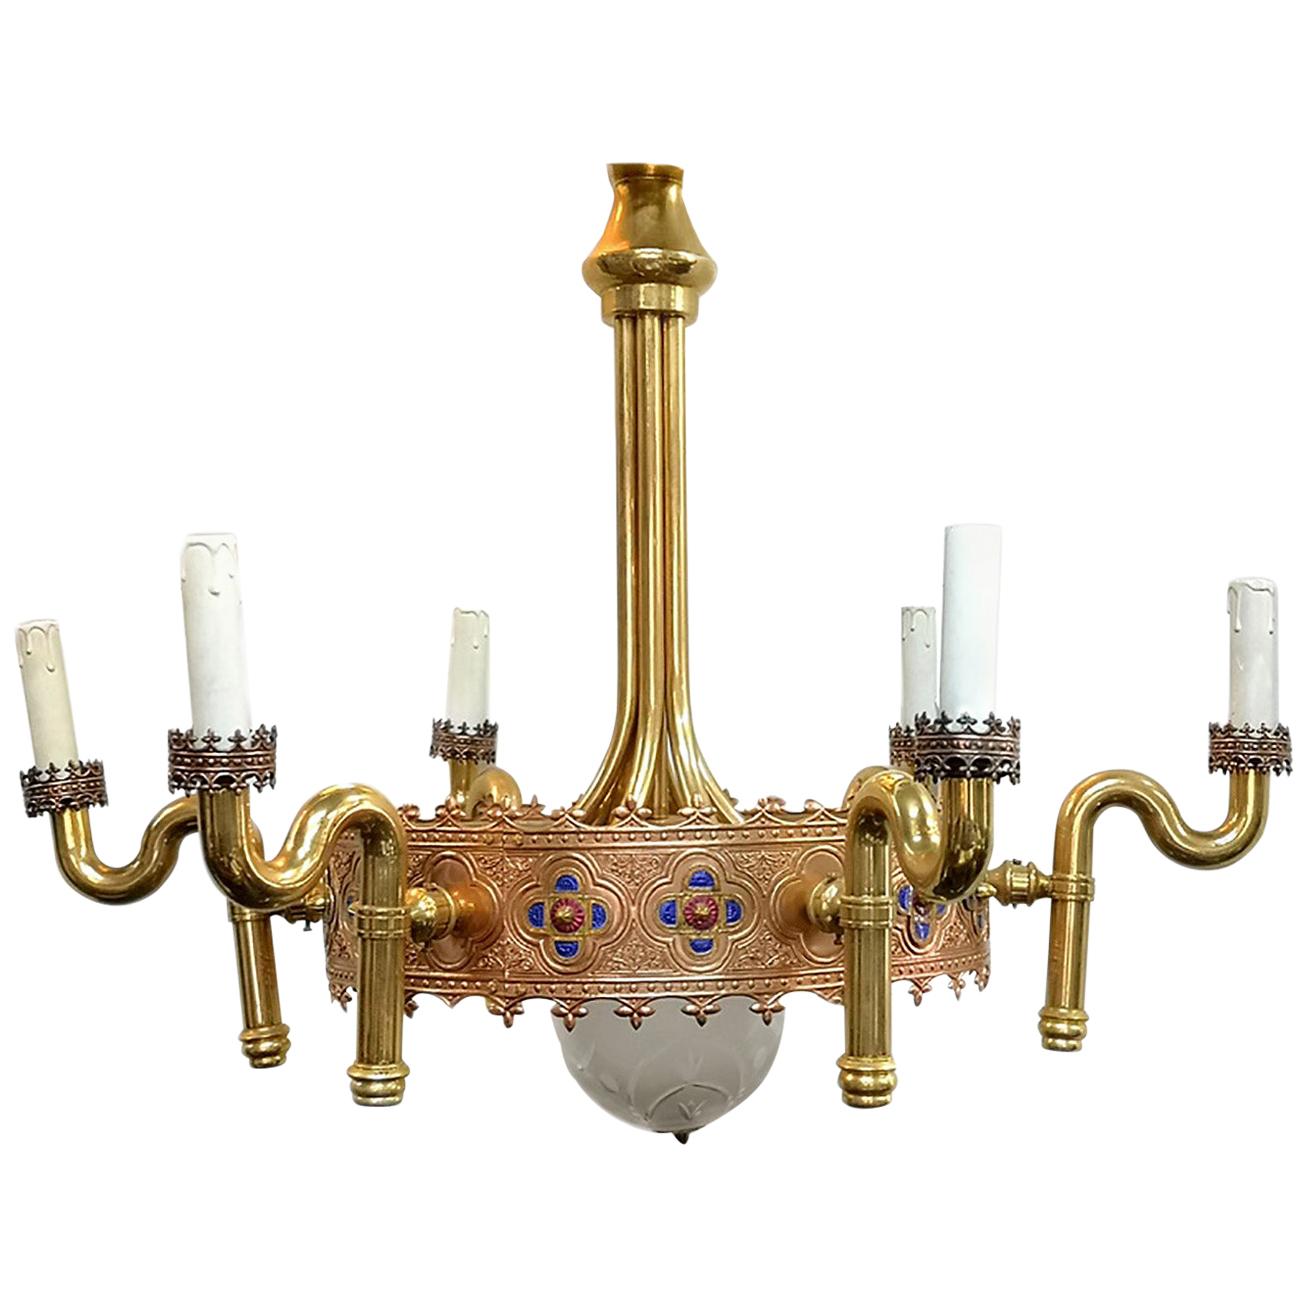 Very Rare Gold Plated and Enameled Chandelier by Jozsef Engelsz Artist, 1970s For Sale